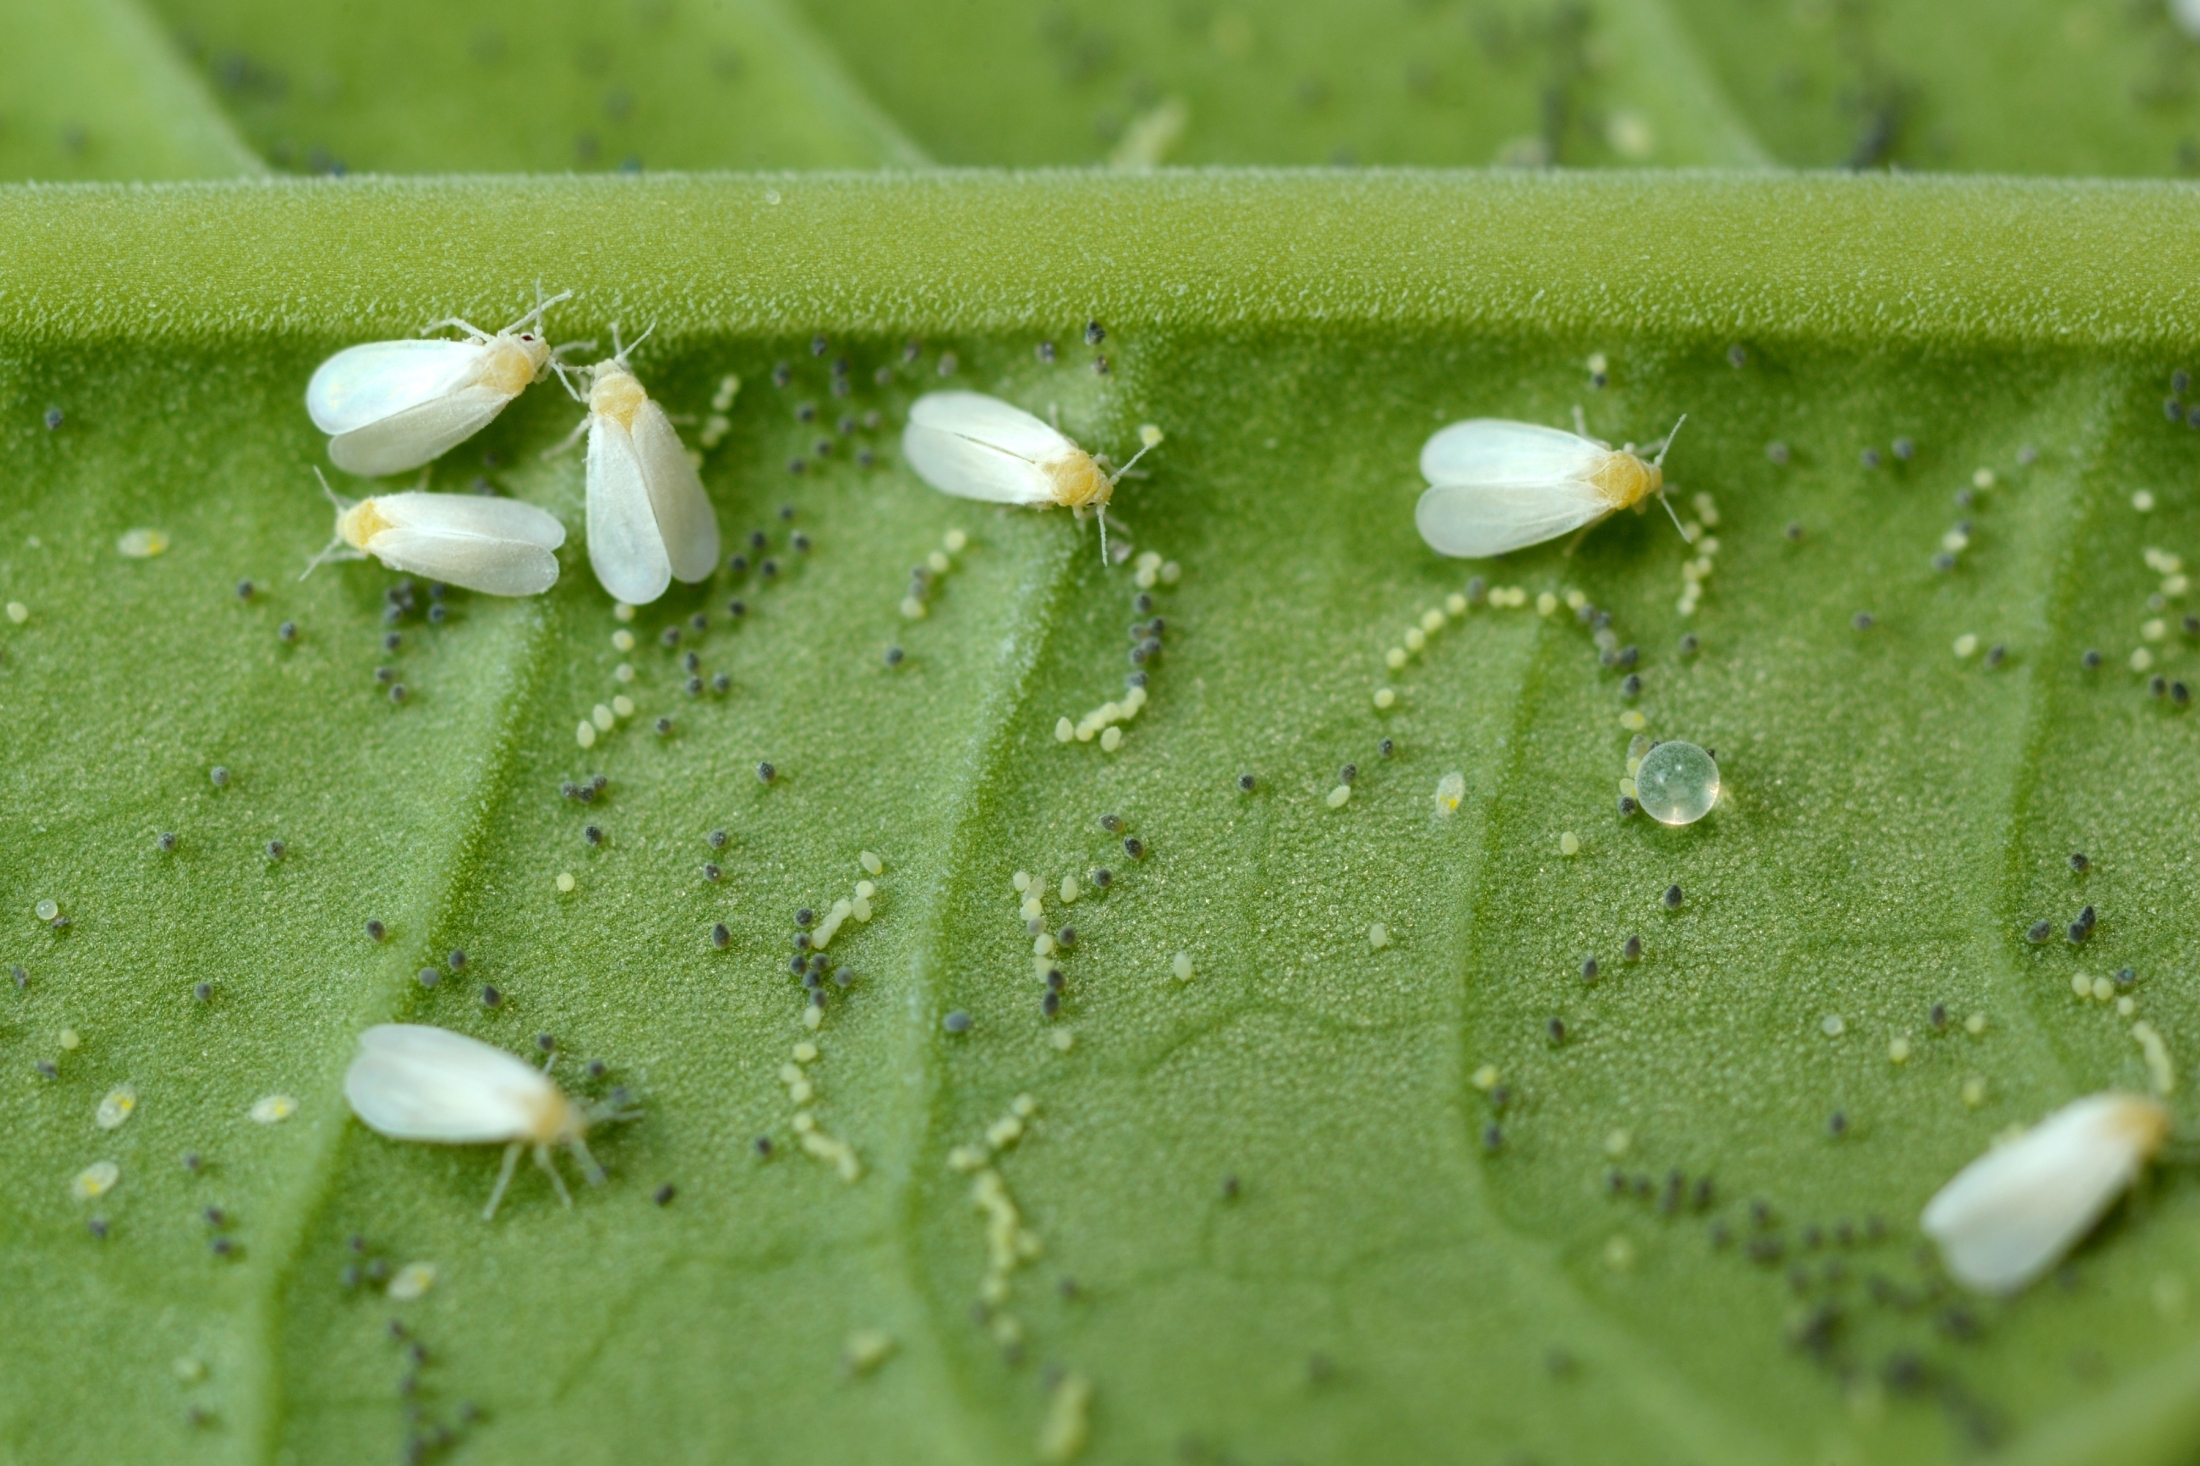 Whiteflies How To Identify And Get Rid Of Whiteflies The Old Farmer S Almanac